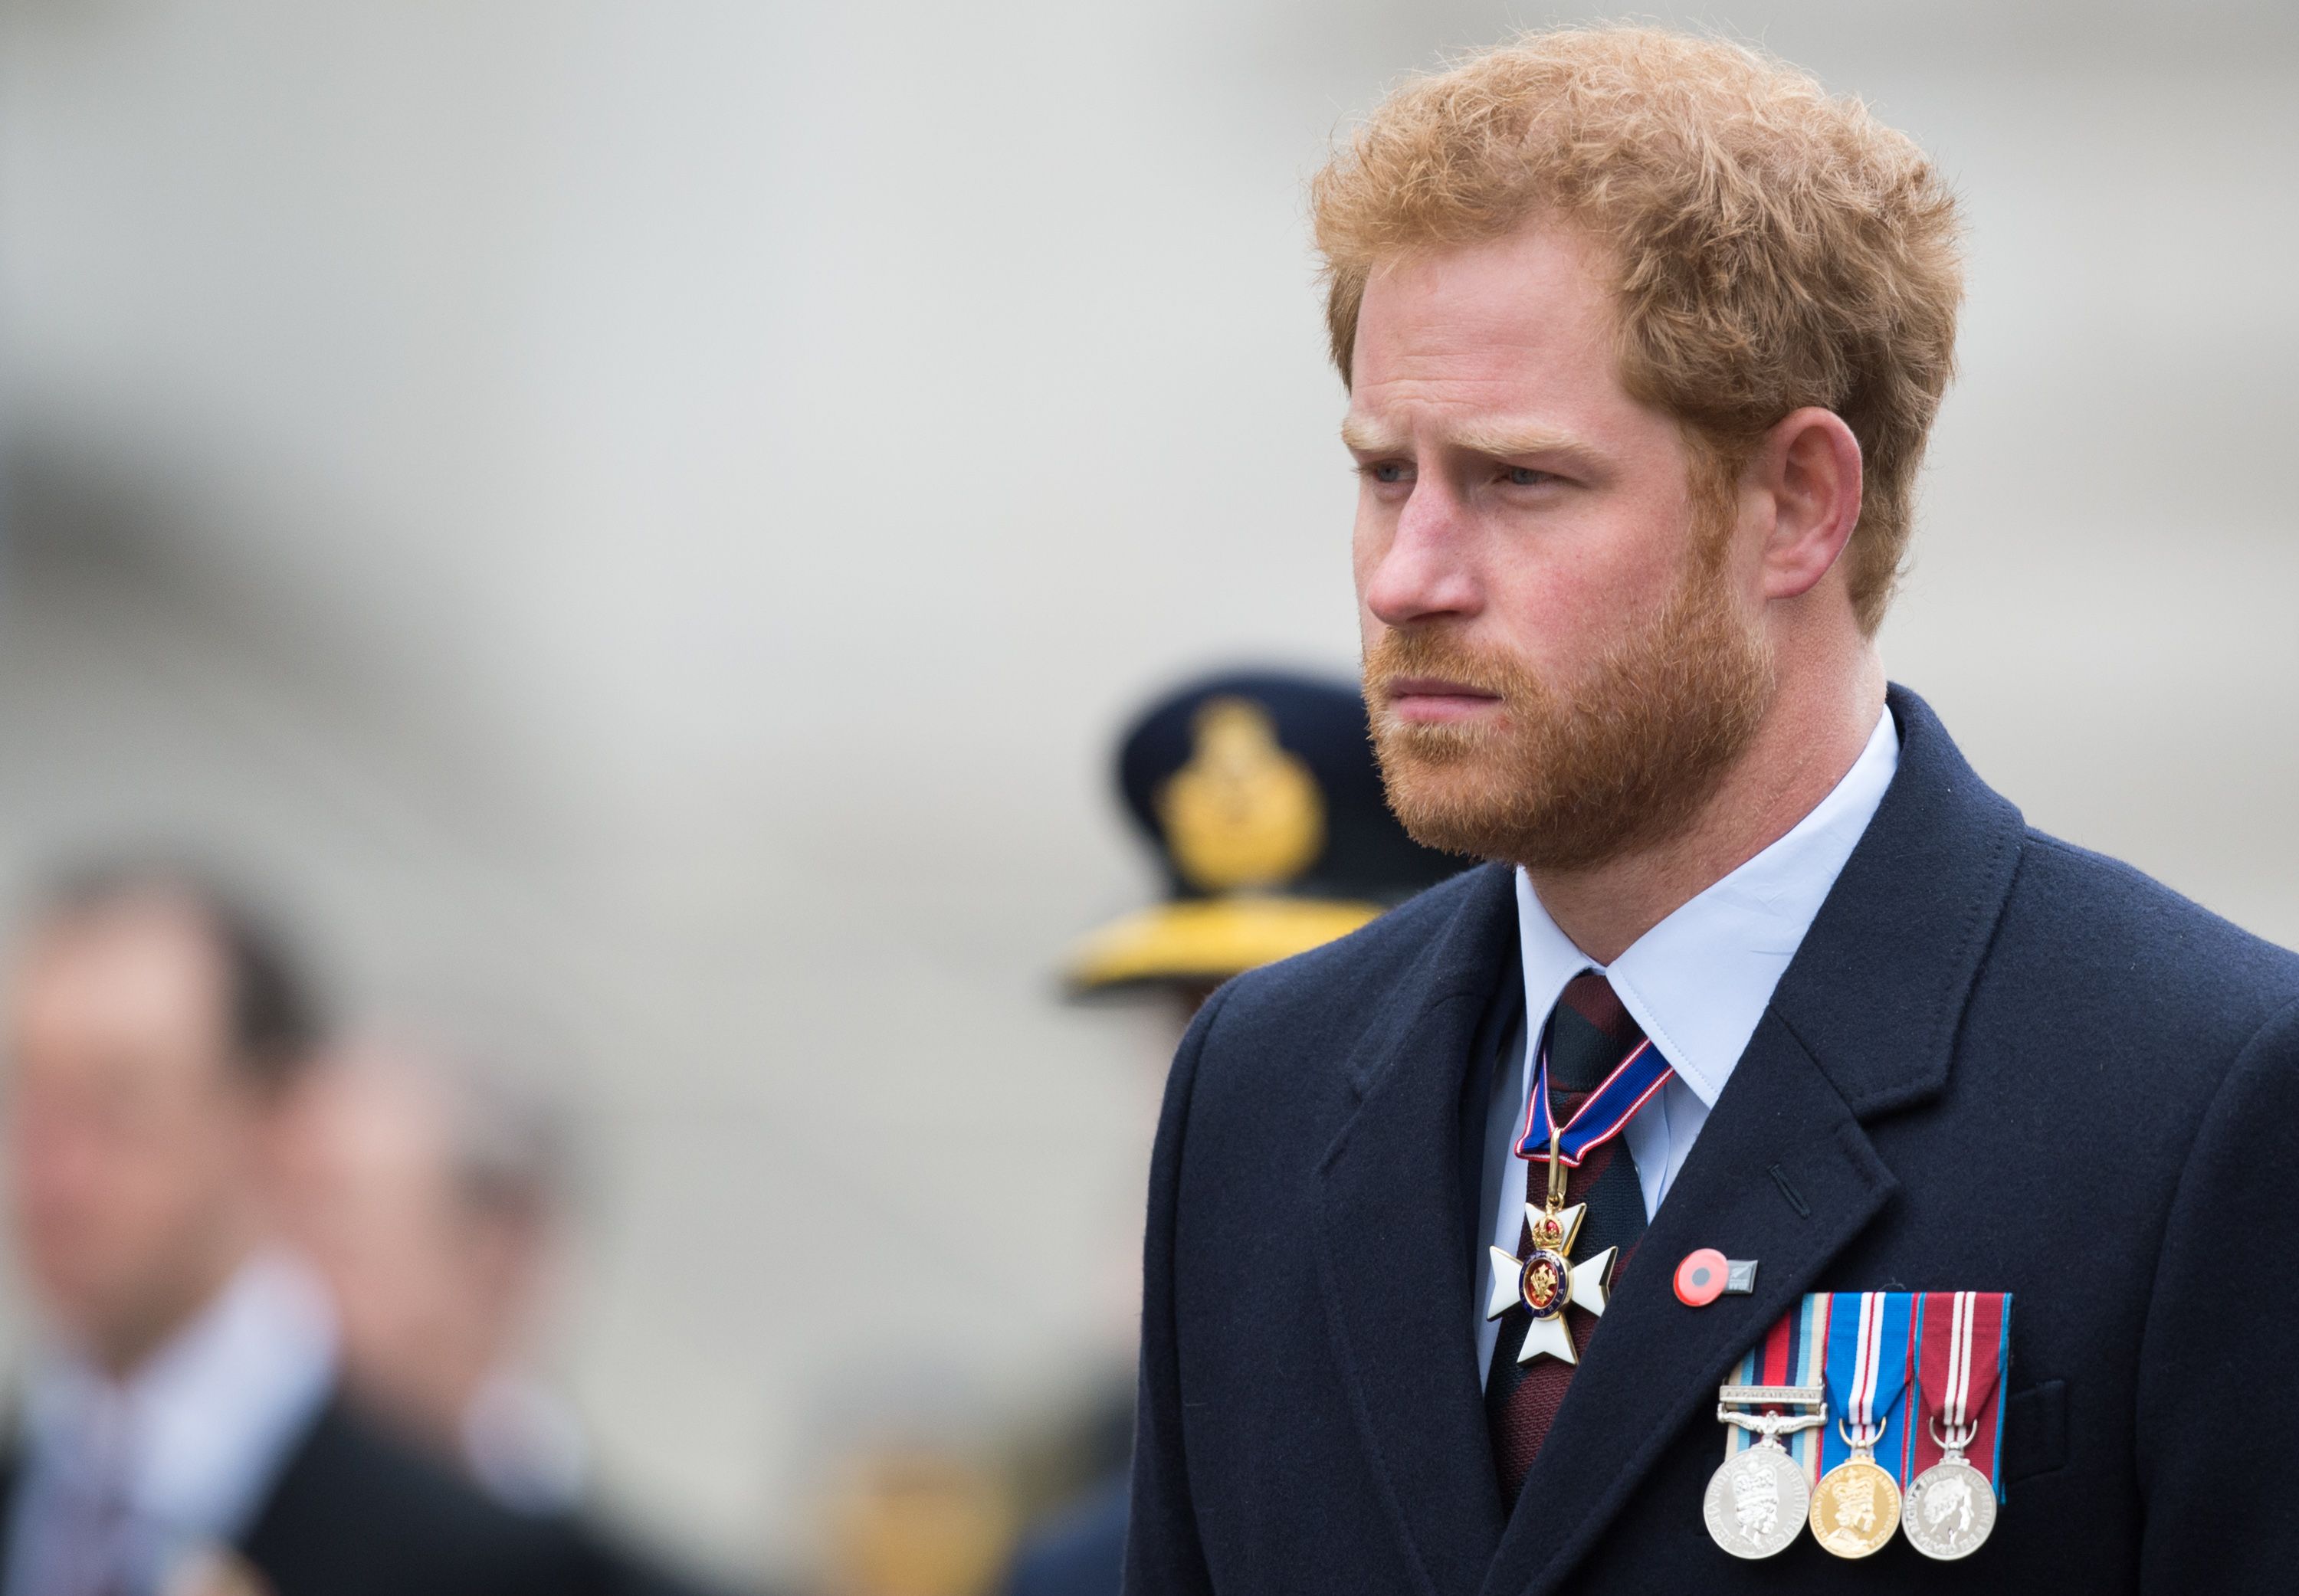 Prince Harry at the ANZAC Service at The Cenotaph on April 25, 2016, in London, England | Photo: Samir Hussein/WireImage/Getty Images